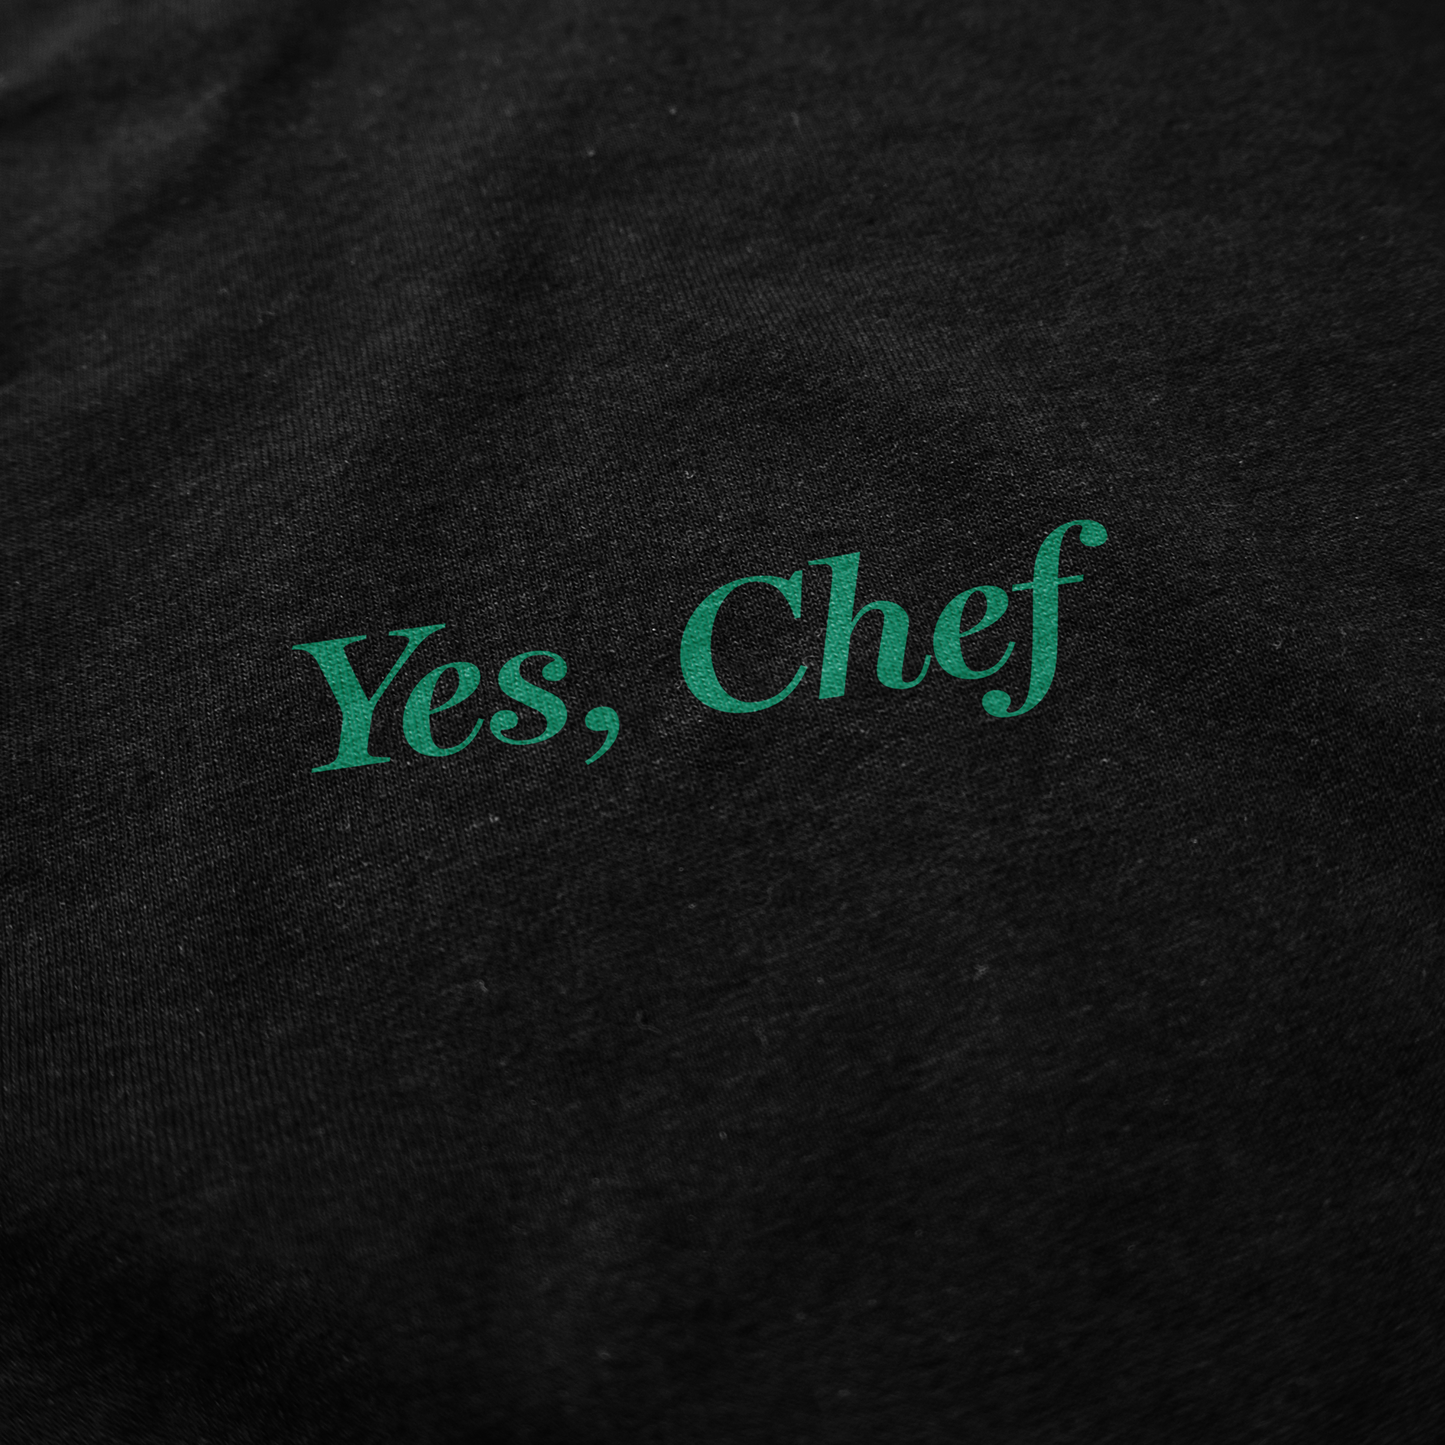 Yes, Chef T Shirt